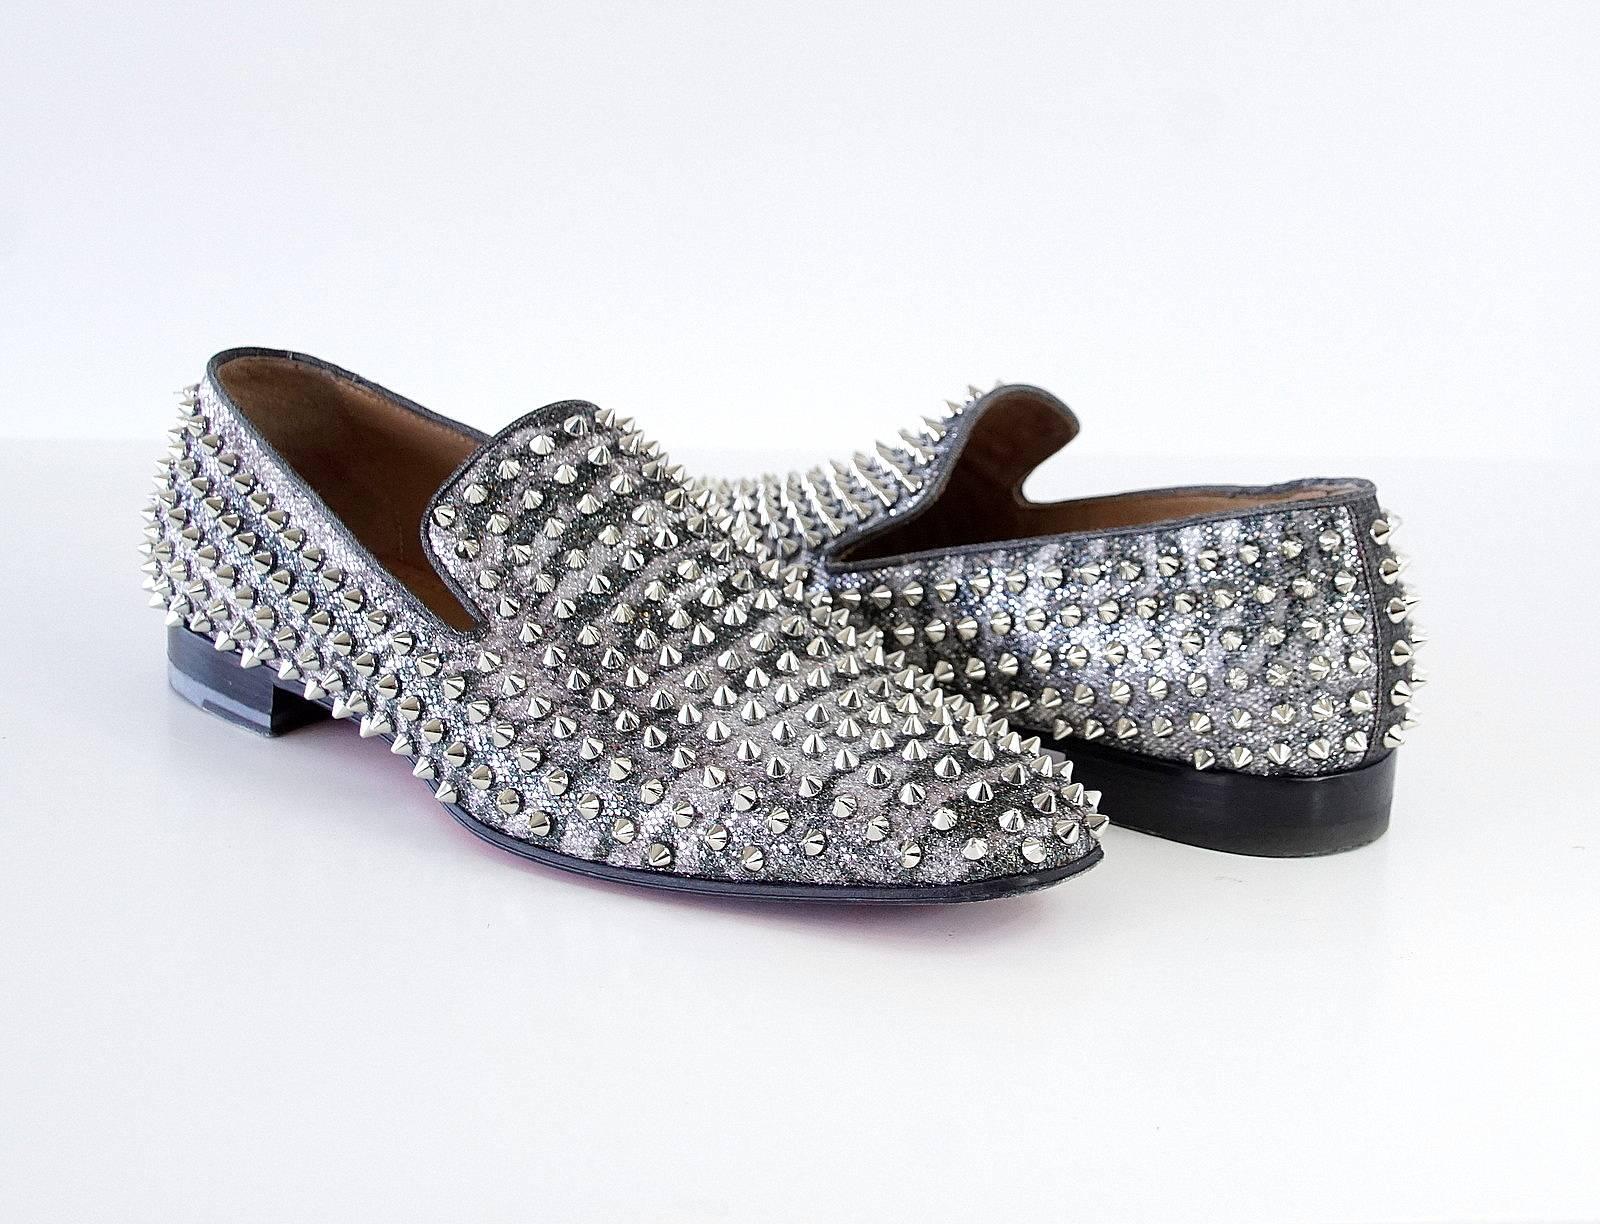 Guaranteed authentic CHRISTIAN LOUBOUTIN men's Dandelion Spikes loafer.
Striking and neutral silver glitter sirene.
Uppers are like new.
Comes with box and sleeper.
final sale

SIZE 42.5
USA SIZE 9.5

CONDITION:
MINT